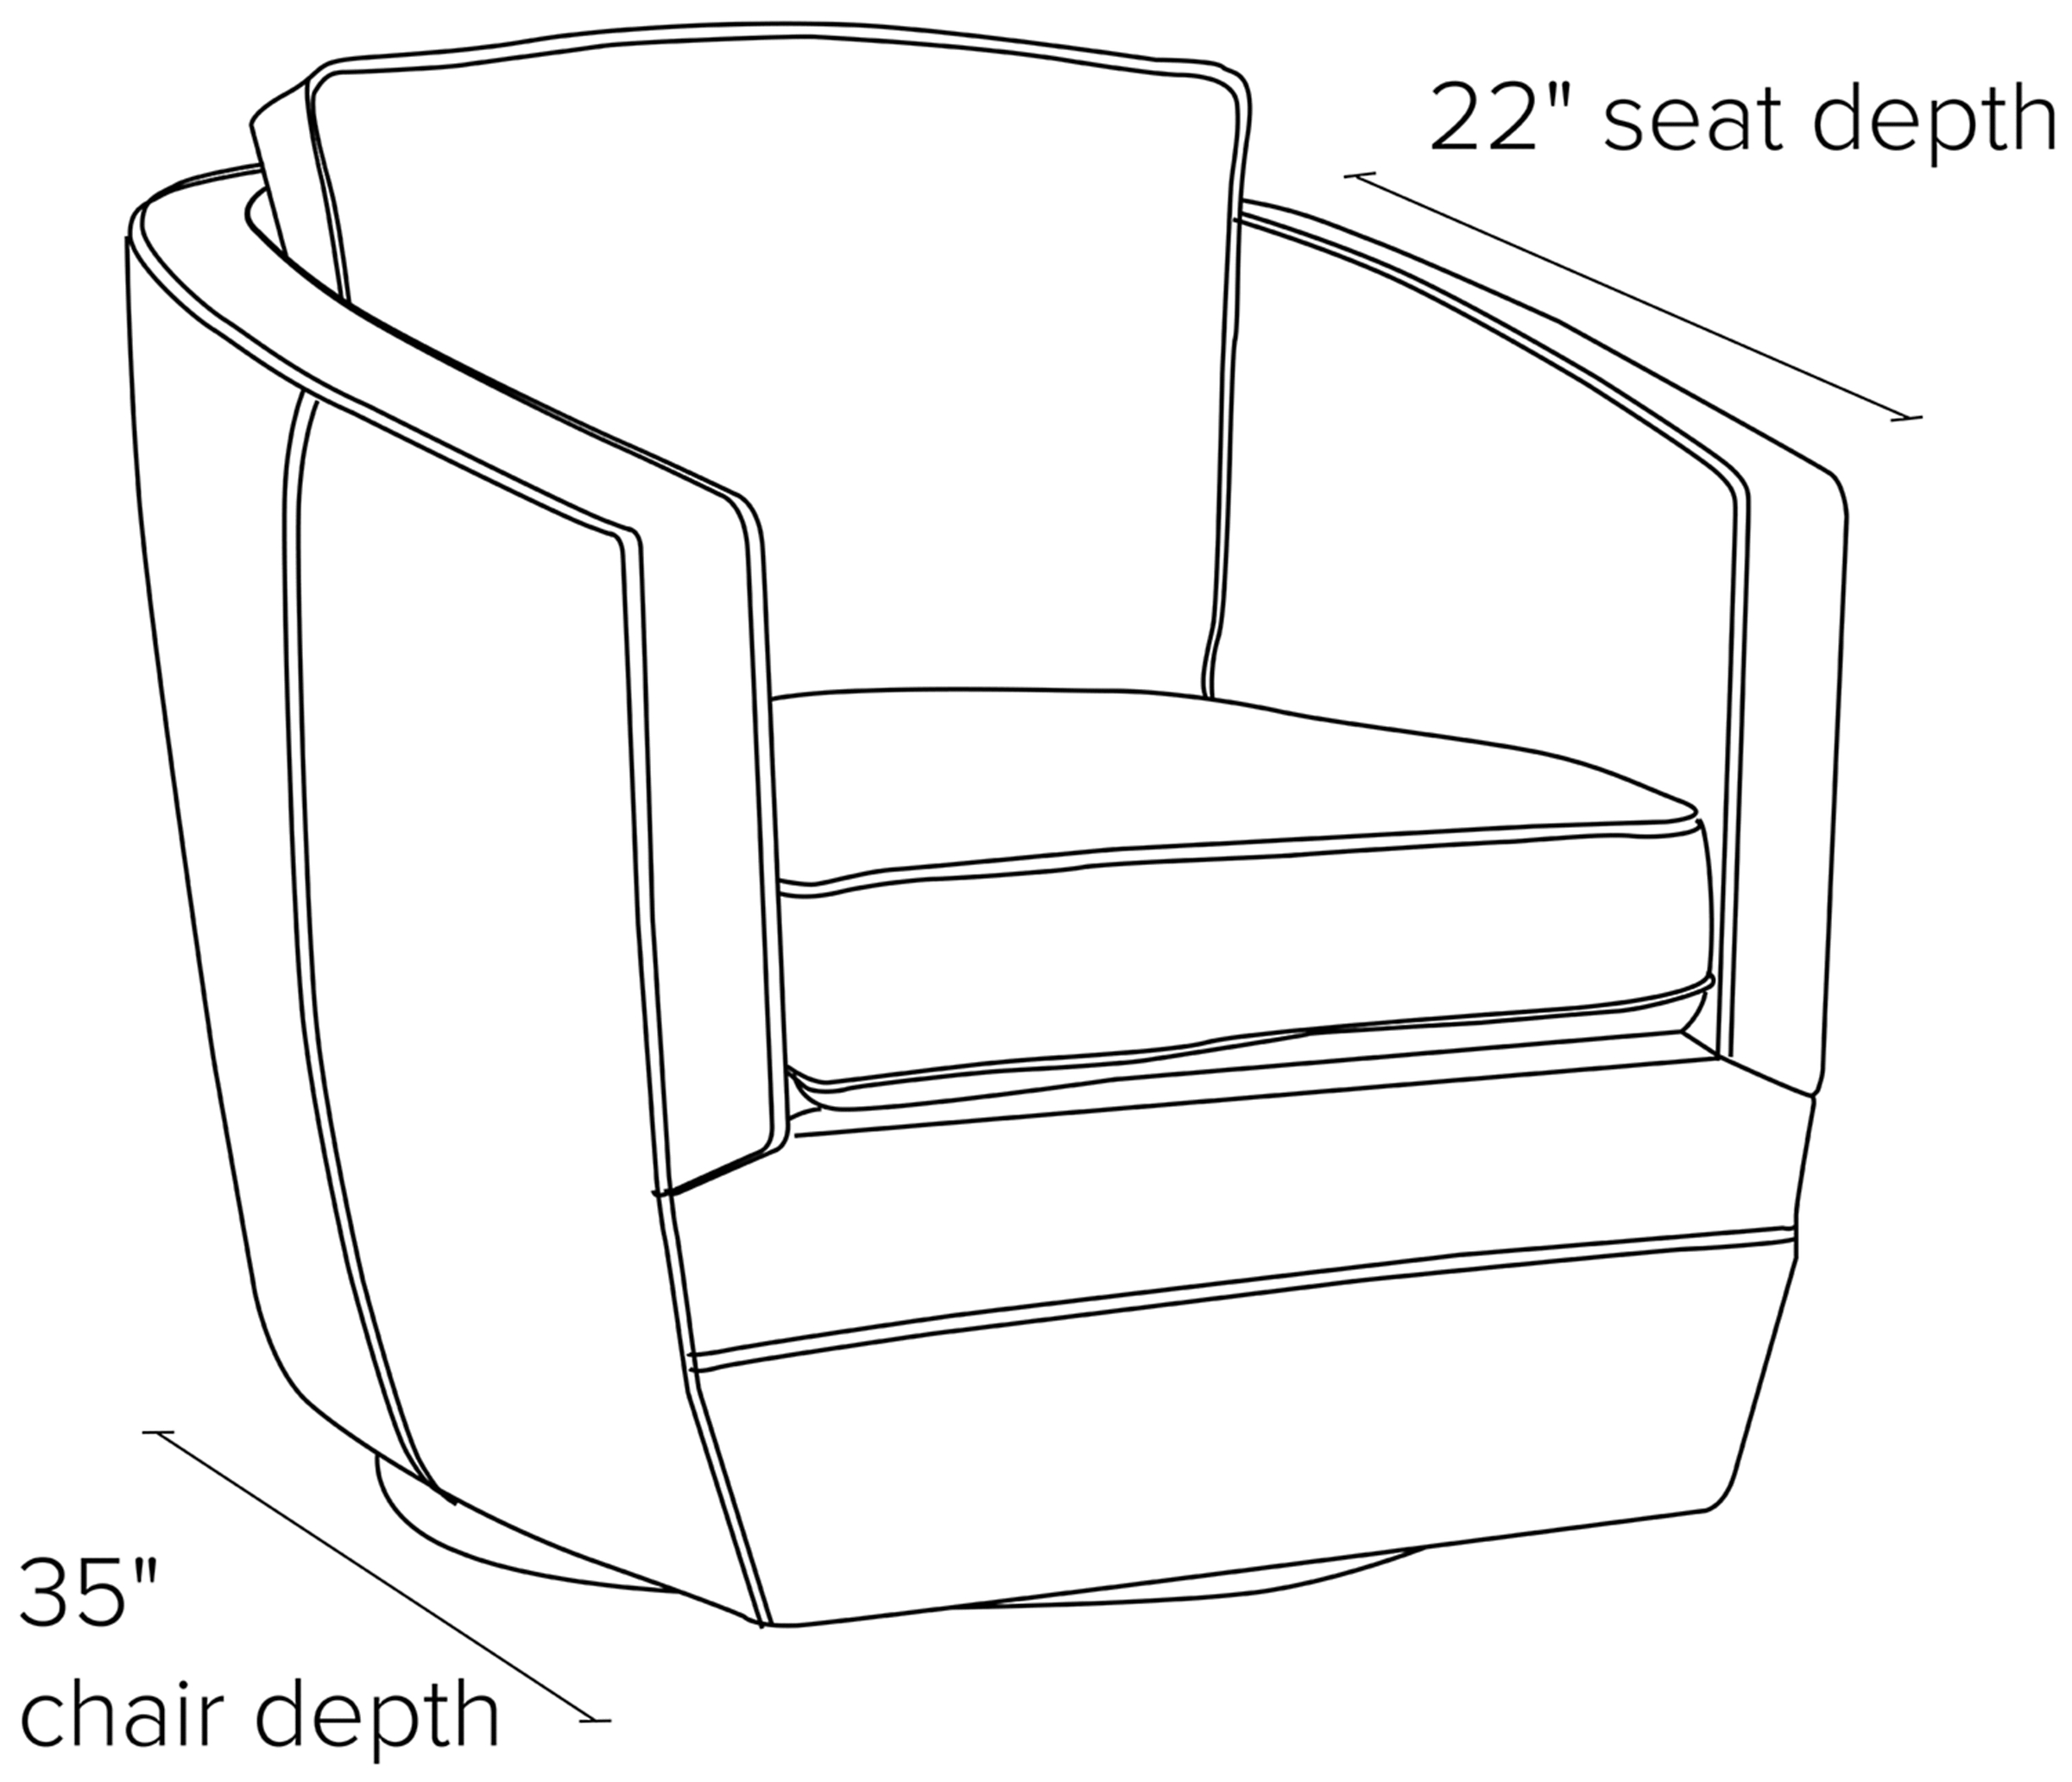 Side view dimension illustration of Ford swivel chair.